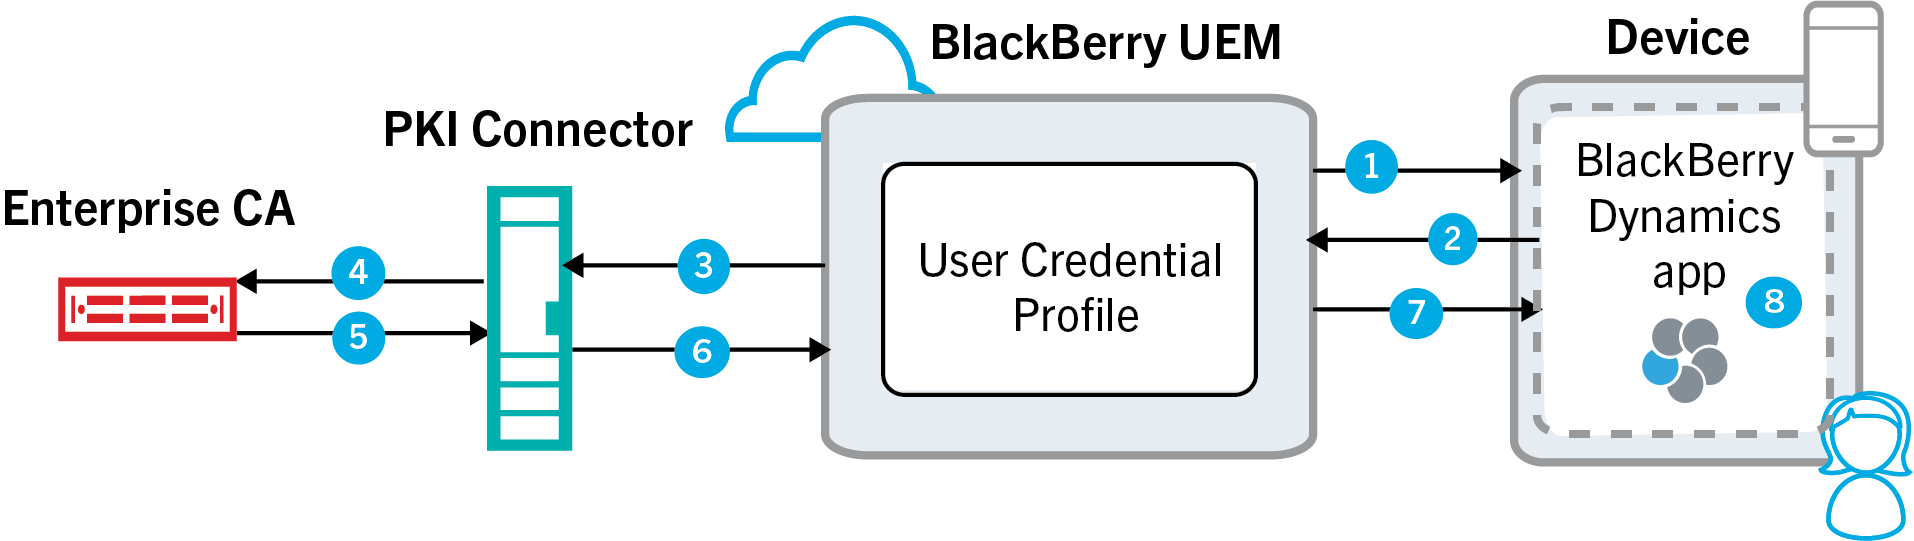 Process flow for certificate enrollment using a PKI connector